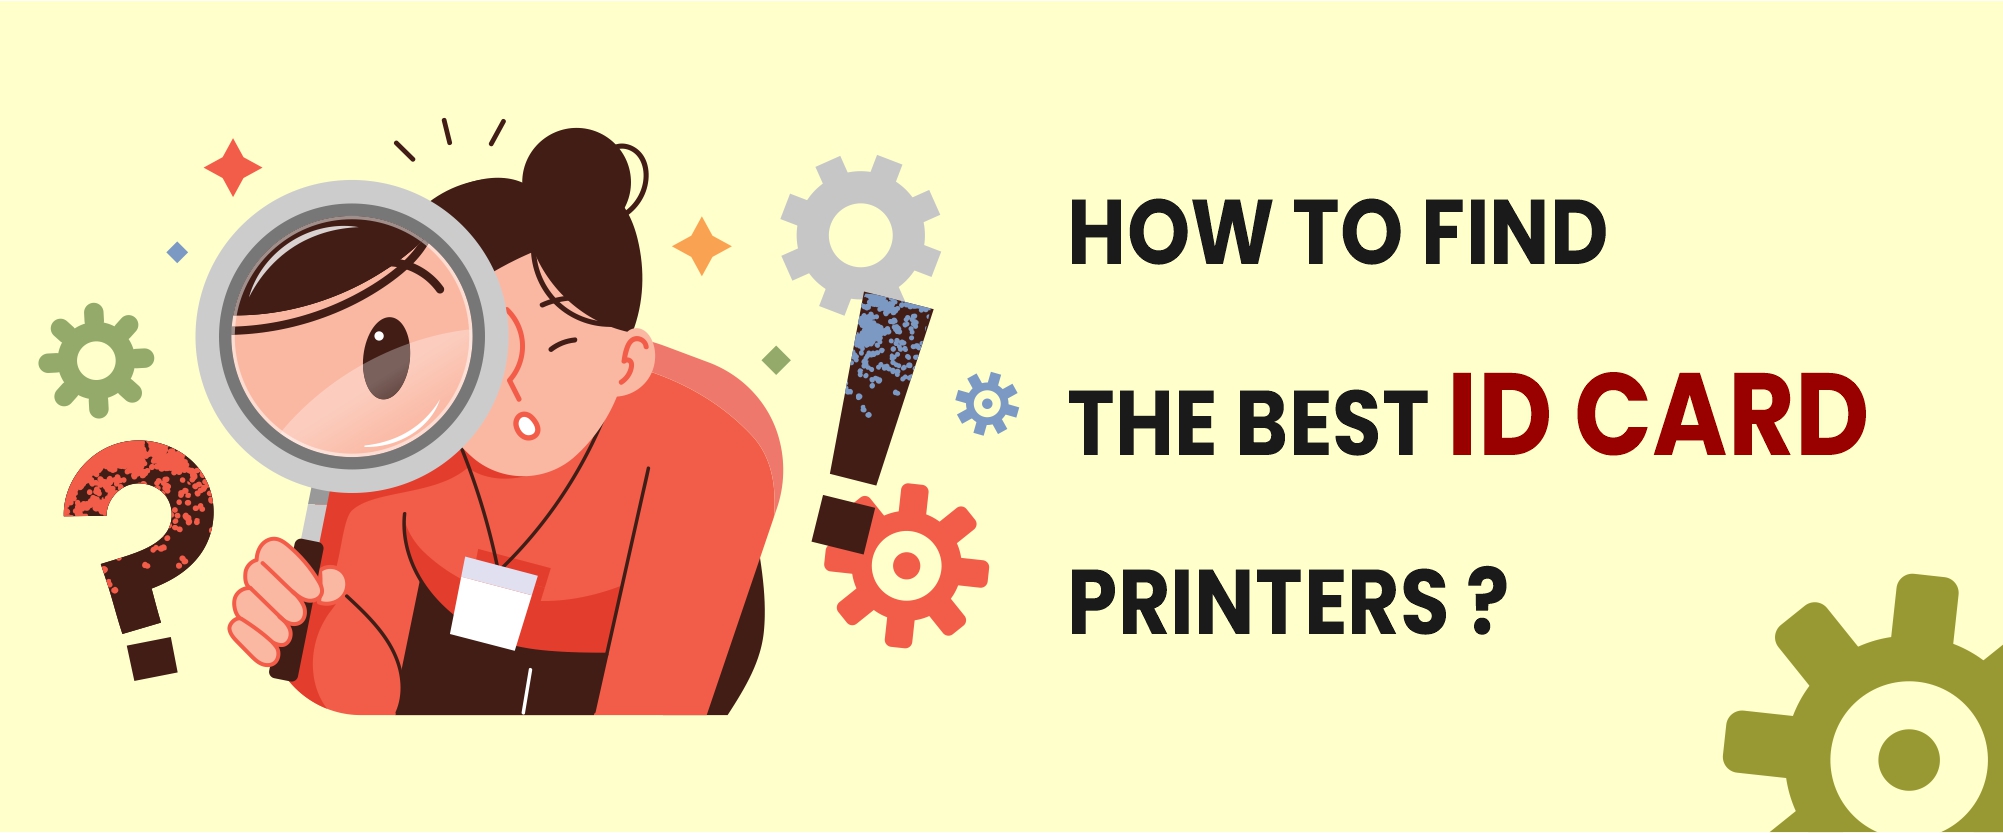 How to Find the Best ID Card Printer